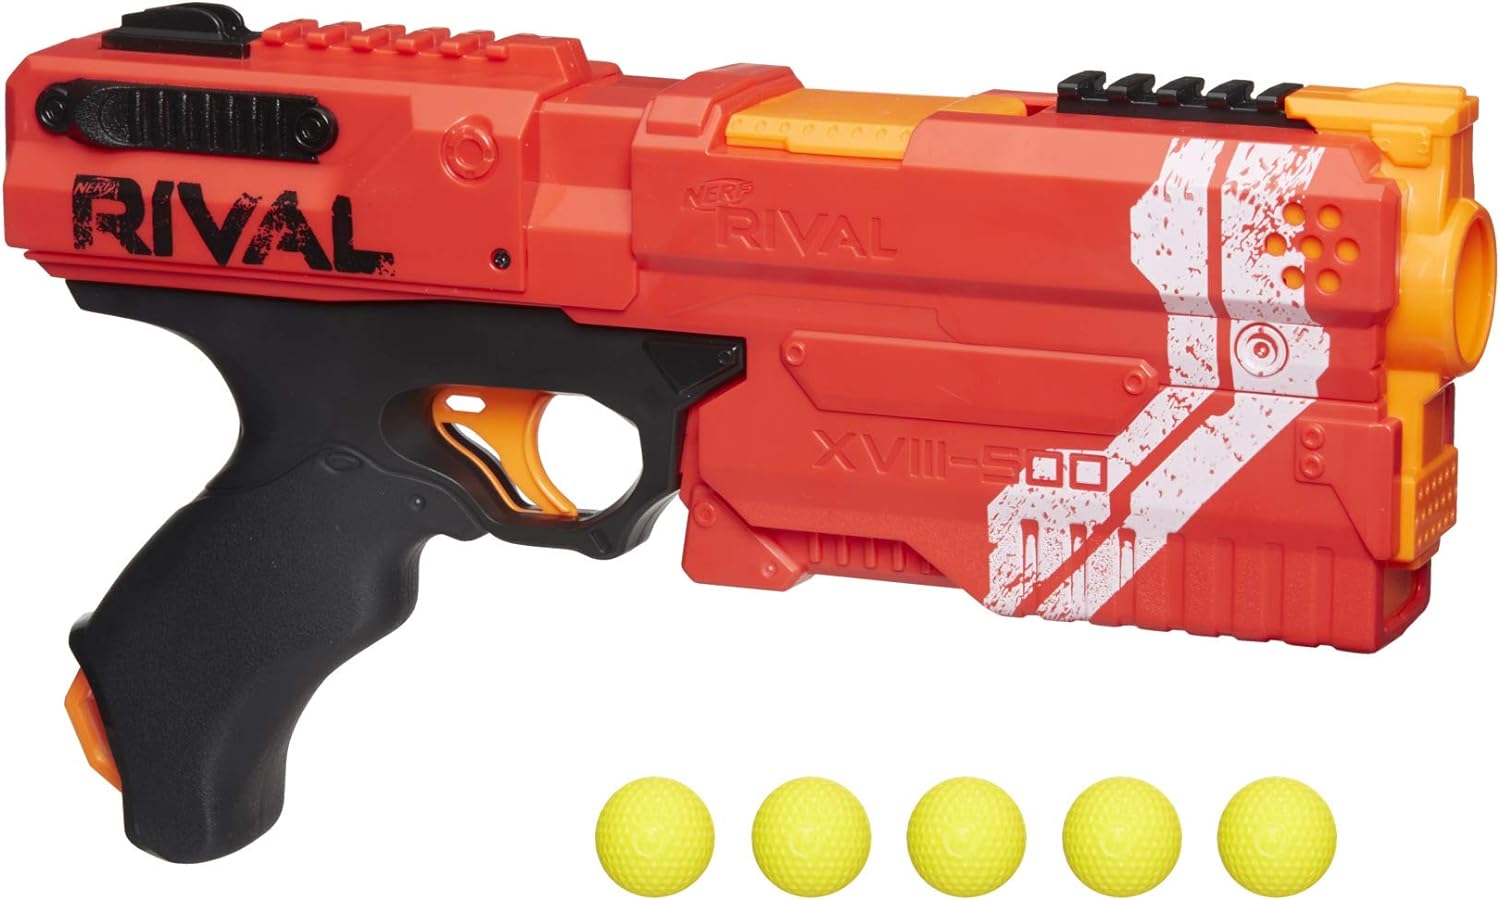 Strongest Nerf Blaster I've had. Doesn't hut to get hit by the ball. Pretty tough to pull back the spring but I'm an adult having office fun. 5 rounds is perfect for shooting targets and not enough ammo to make your friends up the ante and get a nerf gun with like 30  rounds lol.